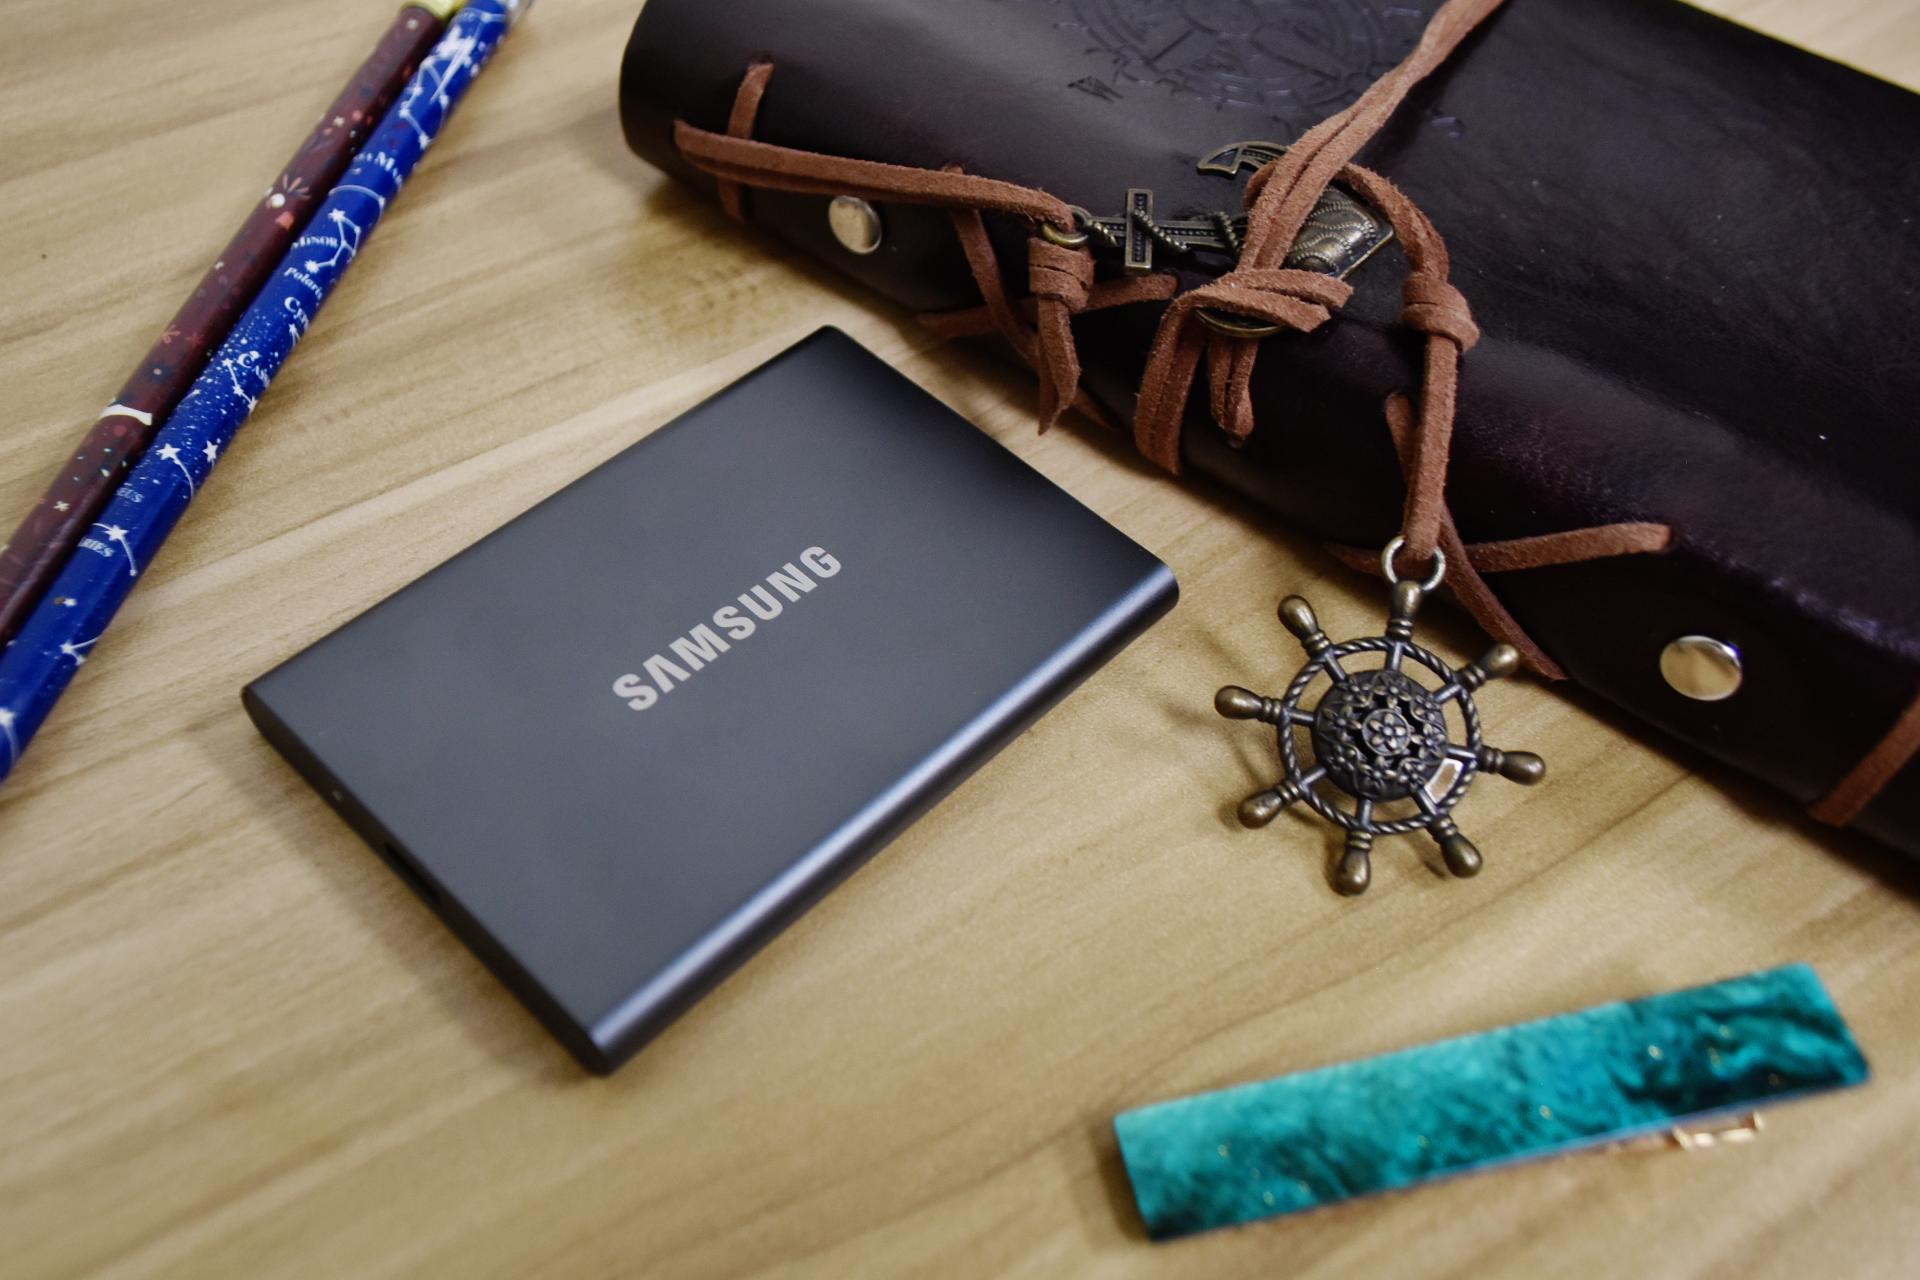 Samsung Portable SSD T7 Review